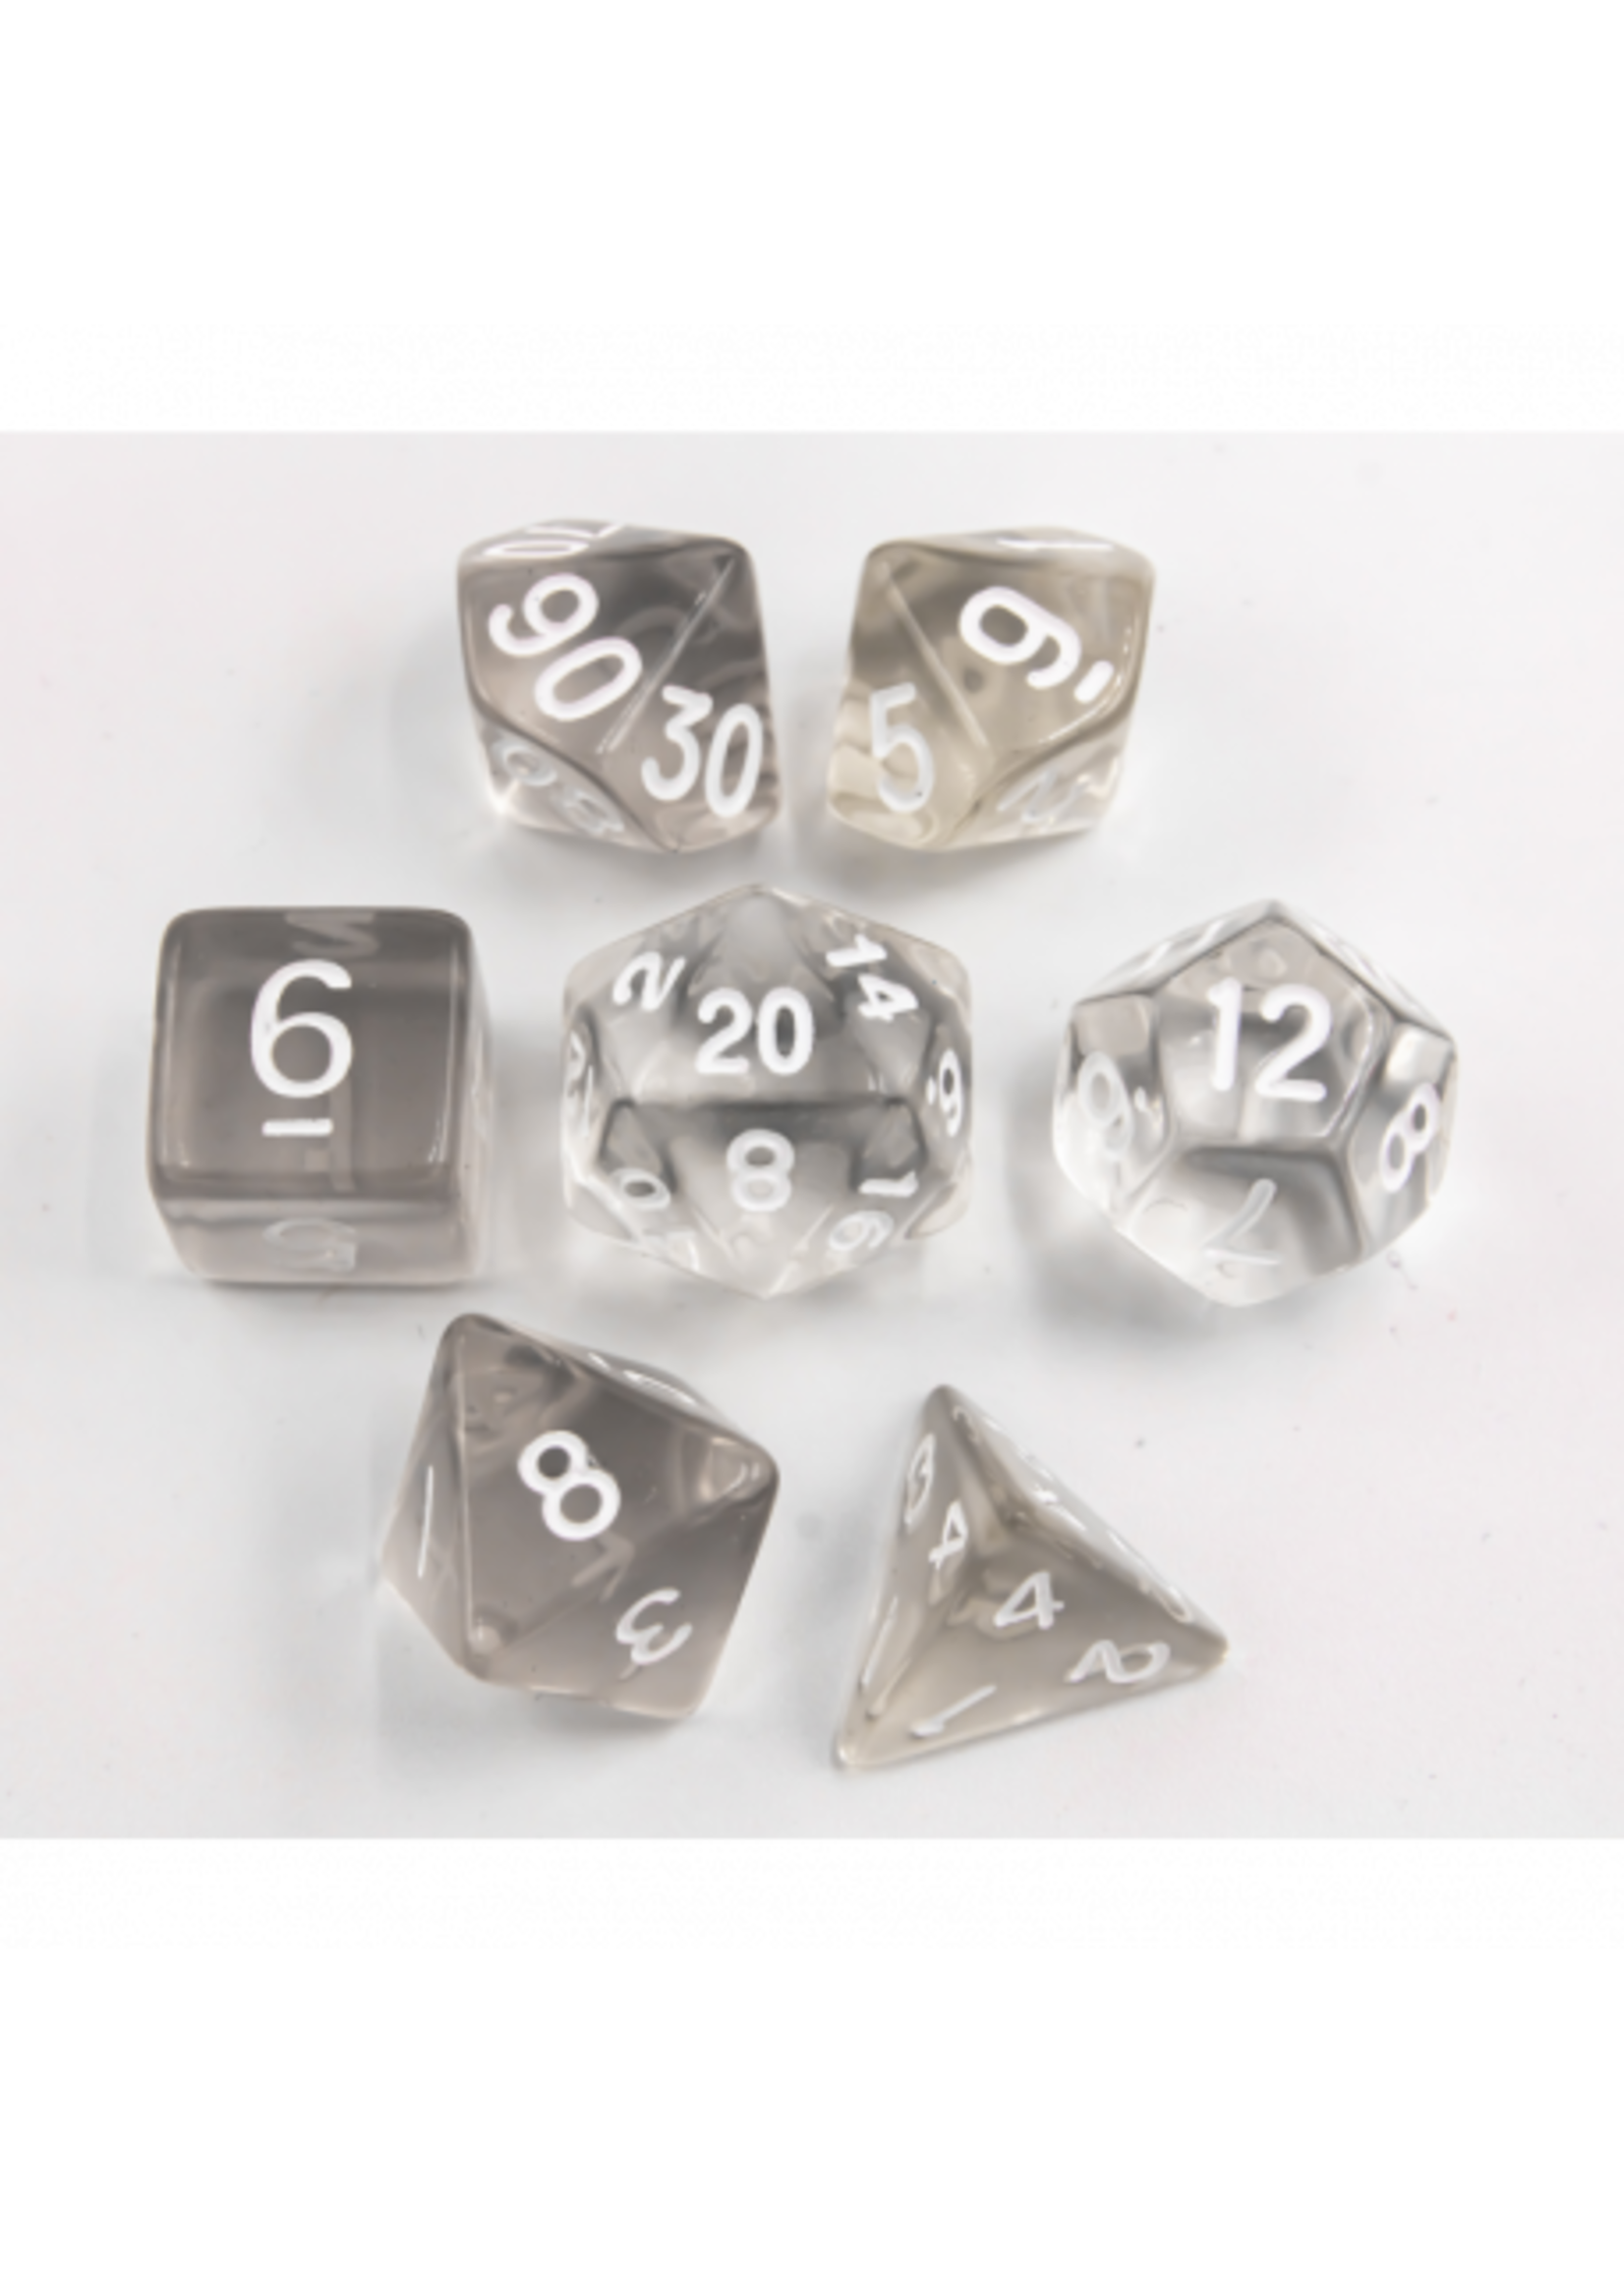 Critical Hit White Set of 7 Transparent Polyhedral Dice with White Numbers for D20 based RPG's